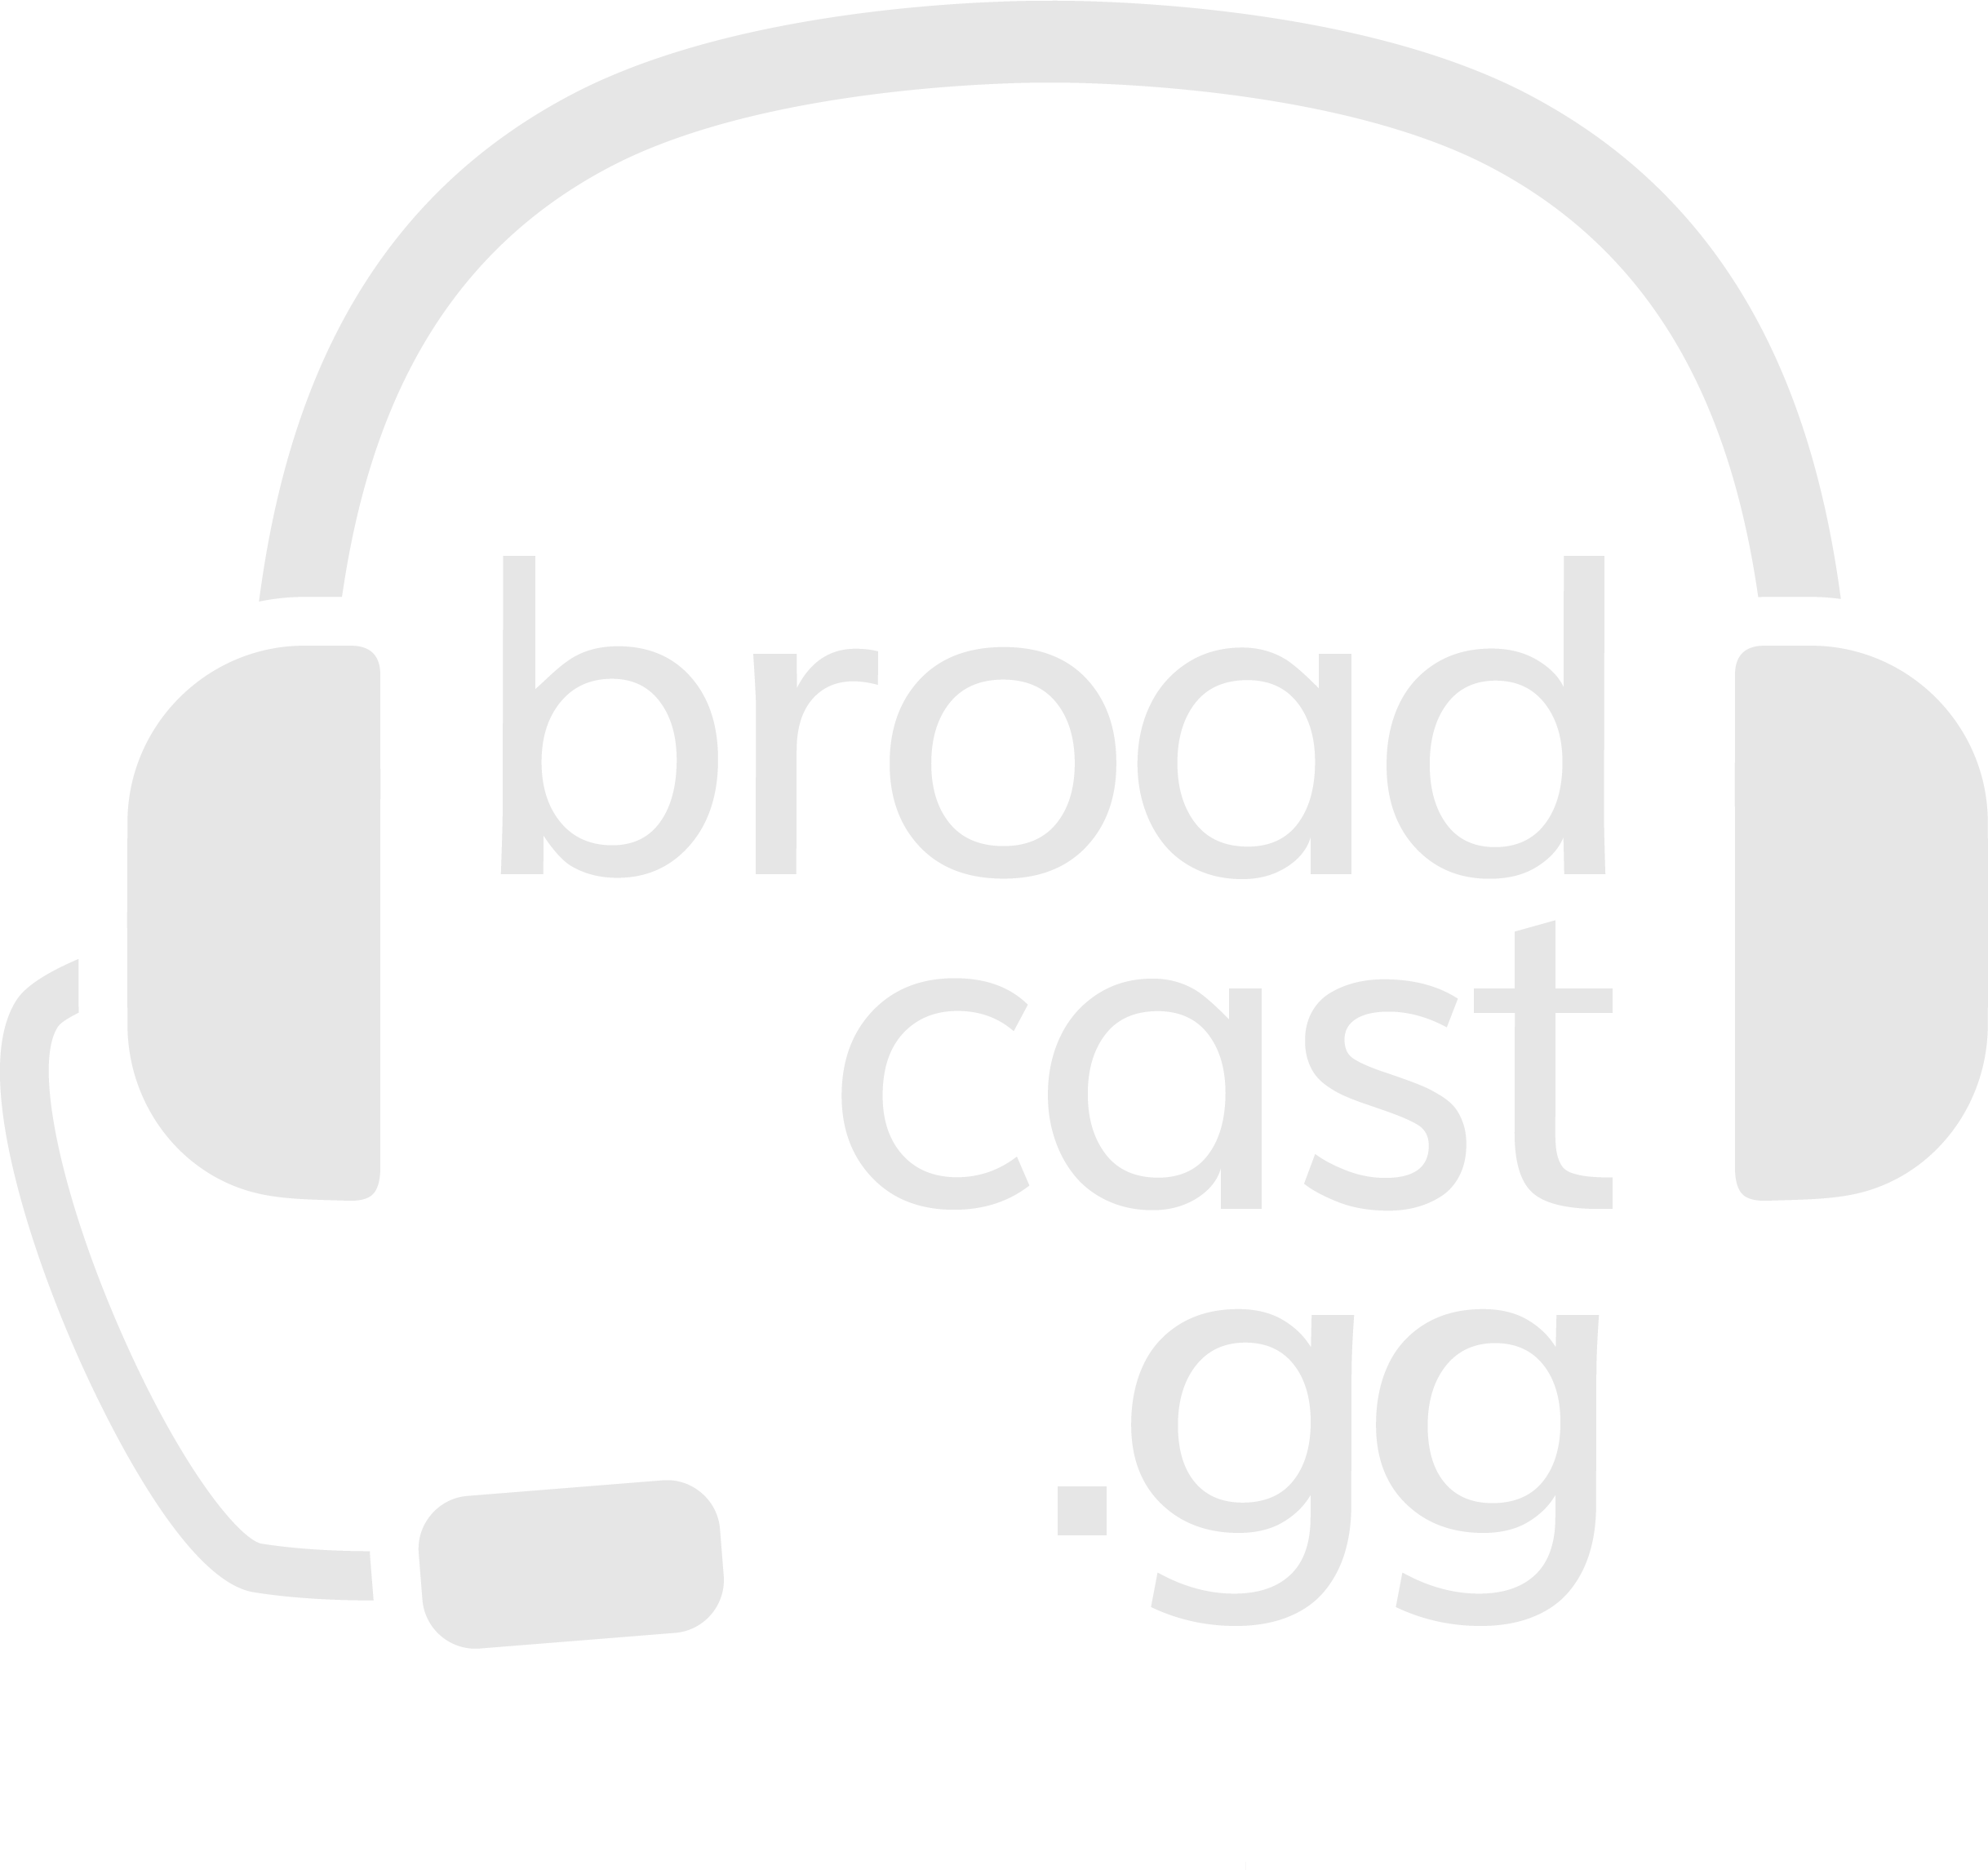 Broadcast - Gg - Broadcast Gg Logo (2436x2291), Png Download